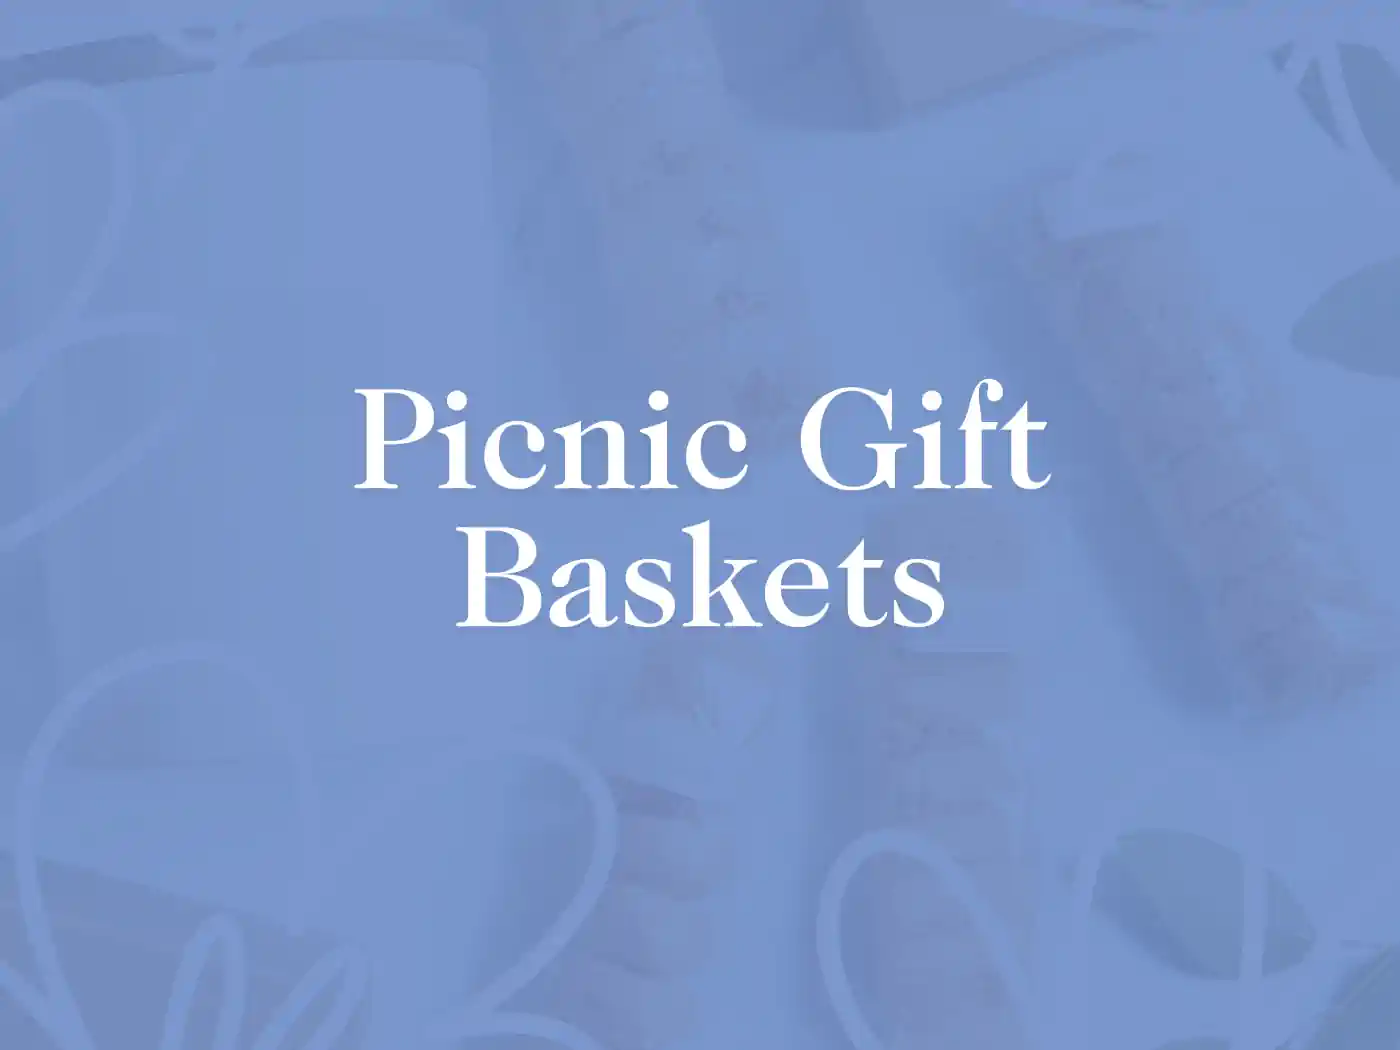 Picnic Gift Baskets text overlay with a background of assorted gift items and ribbons. Fabulous Flowers and Gifts - Picnic Gift Baskets Collection.